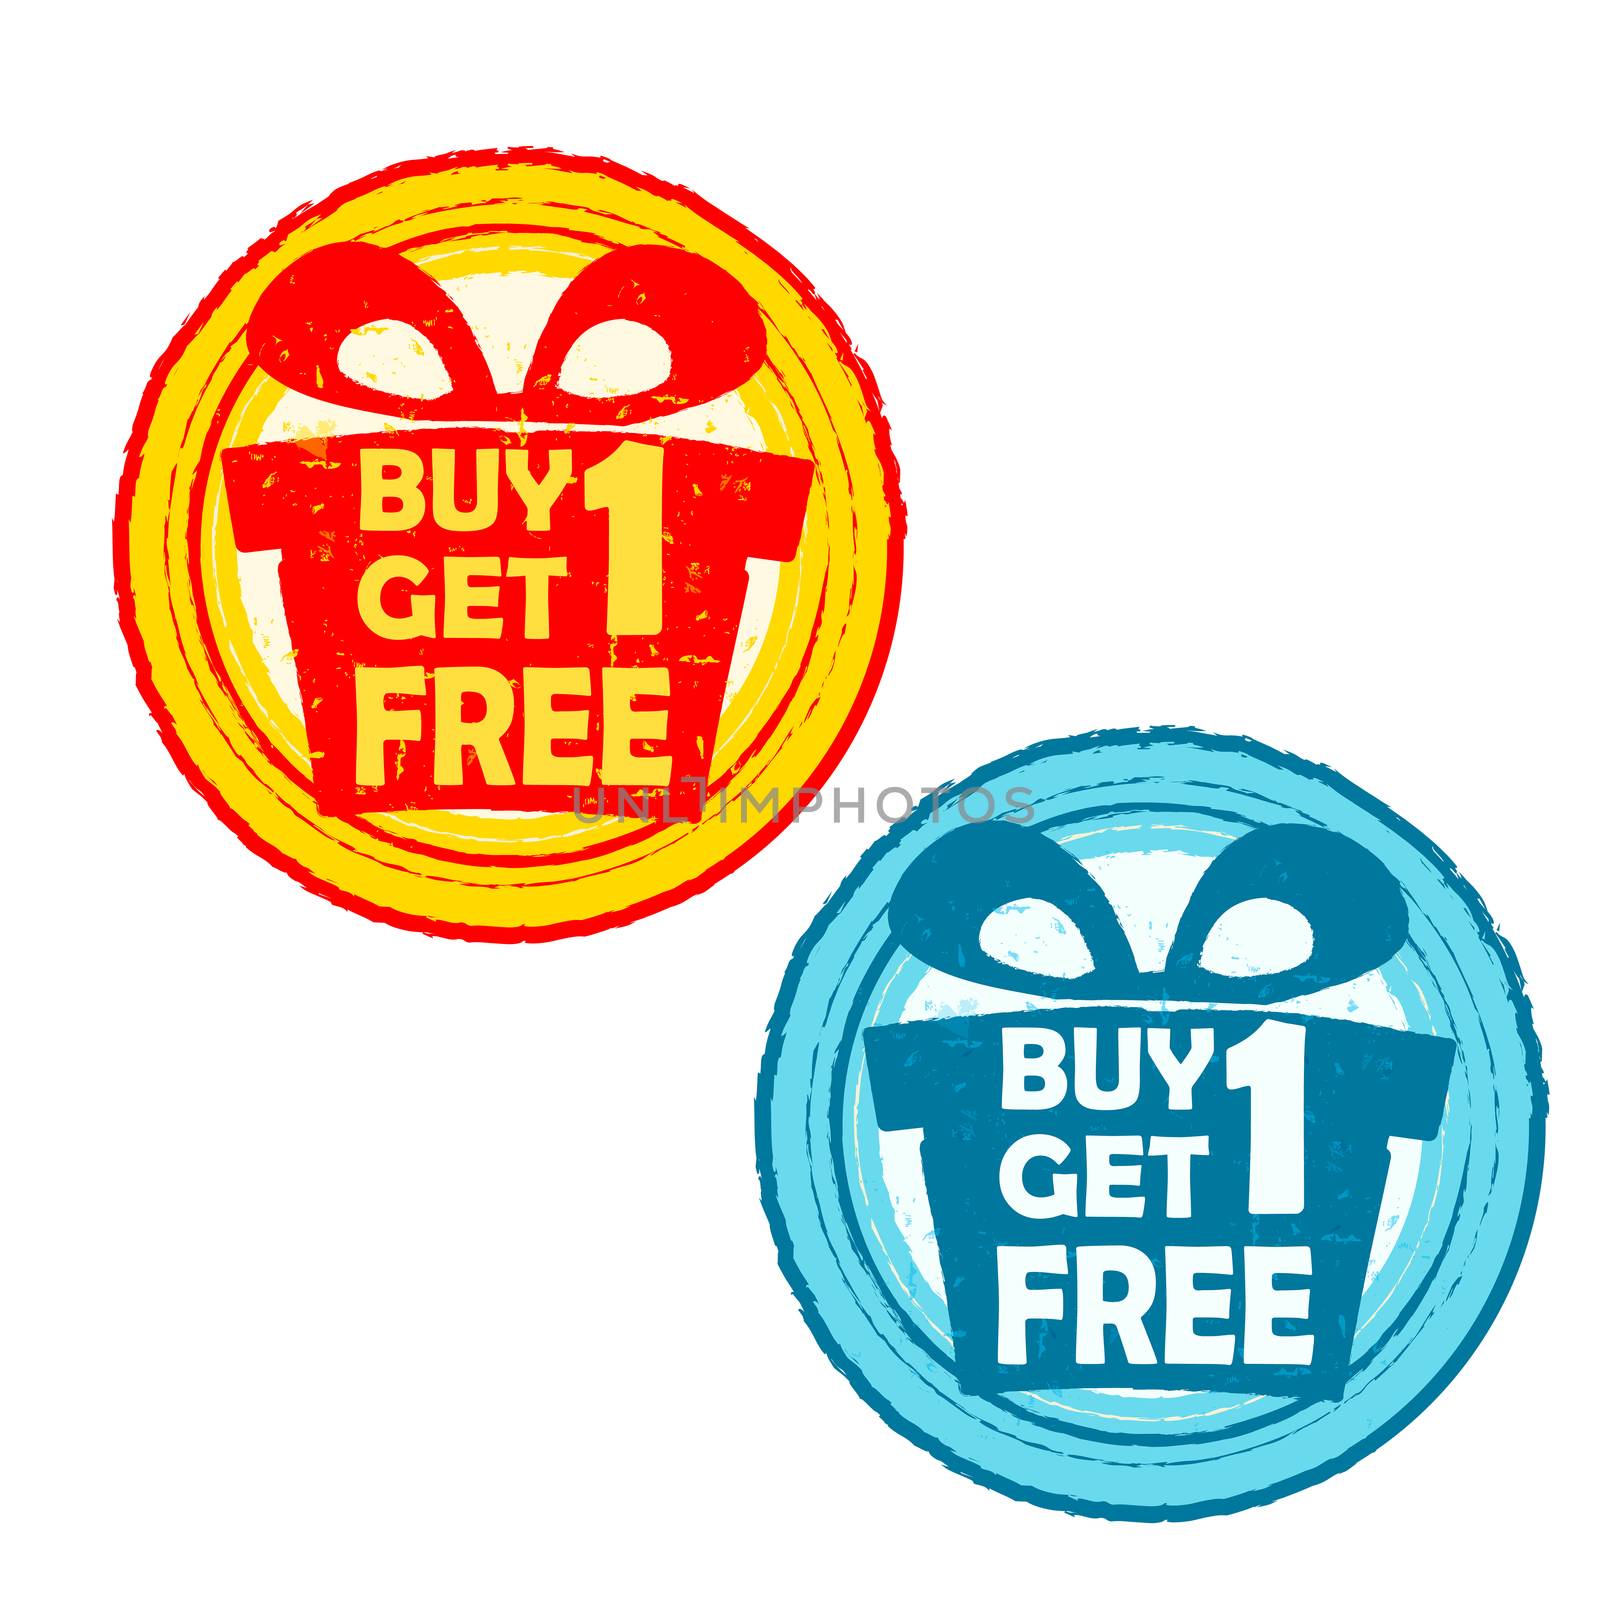 buy one get one free with gift signs, yellow red and blue drawn  by marinini